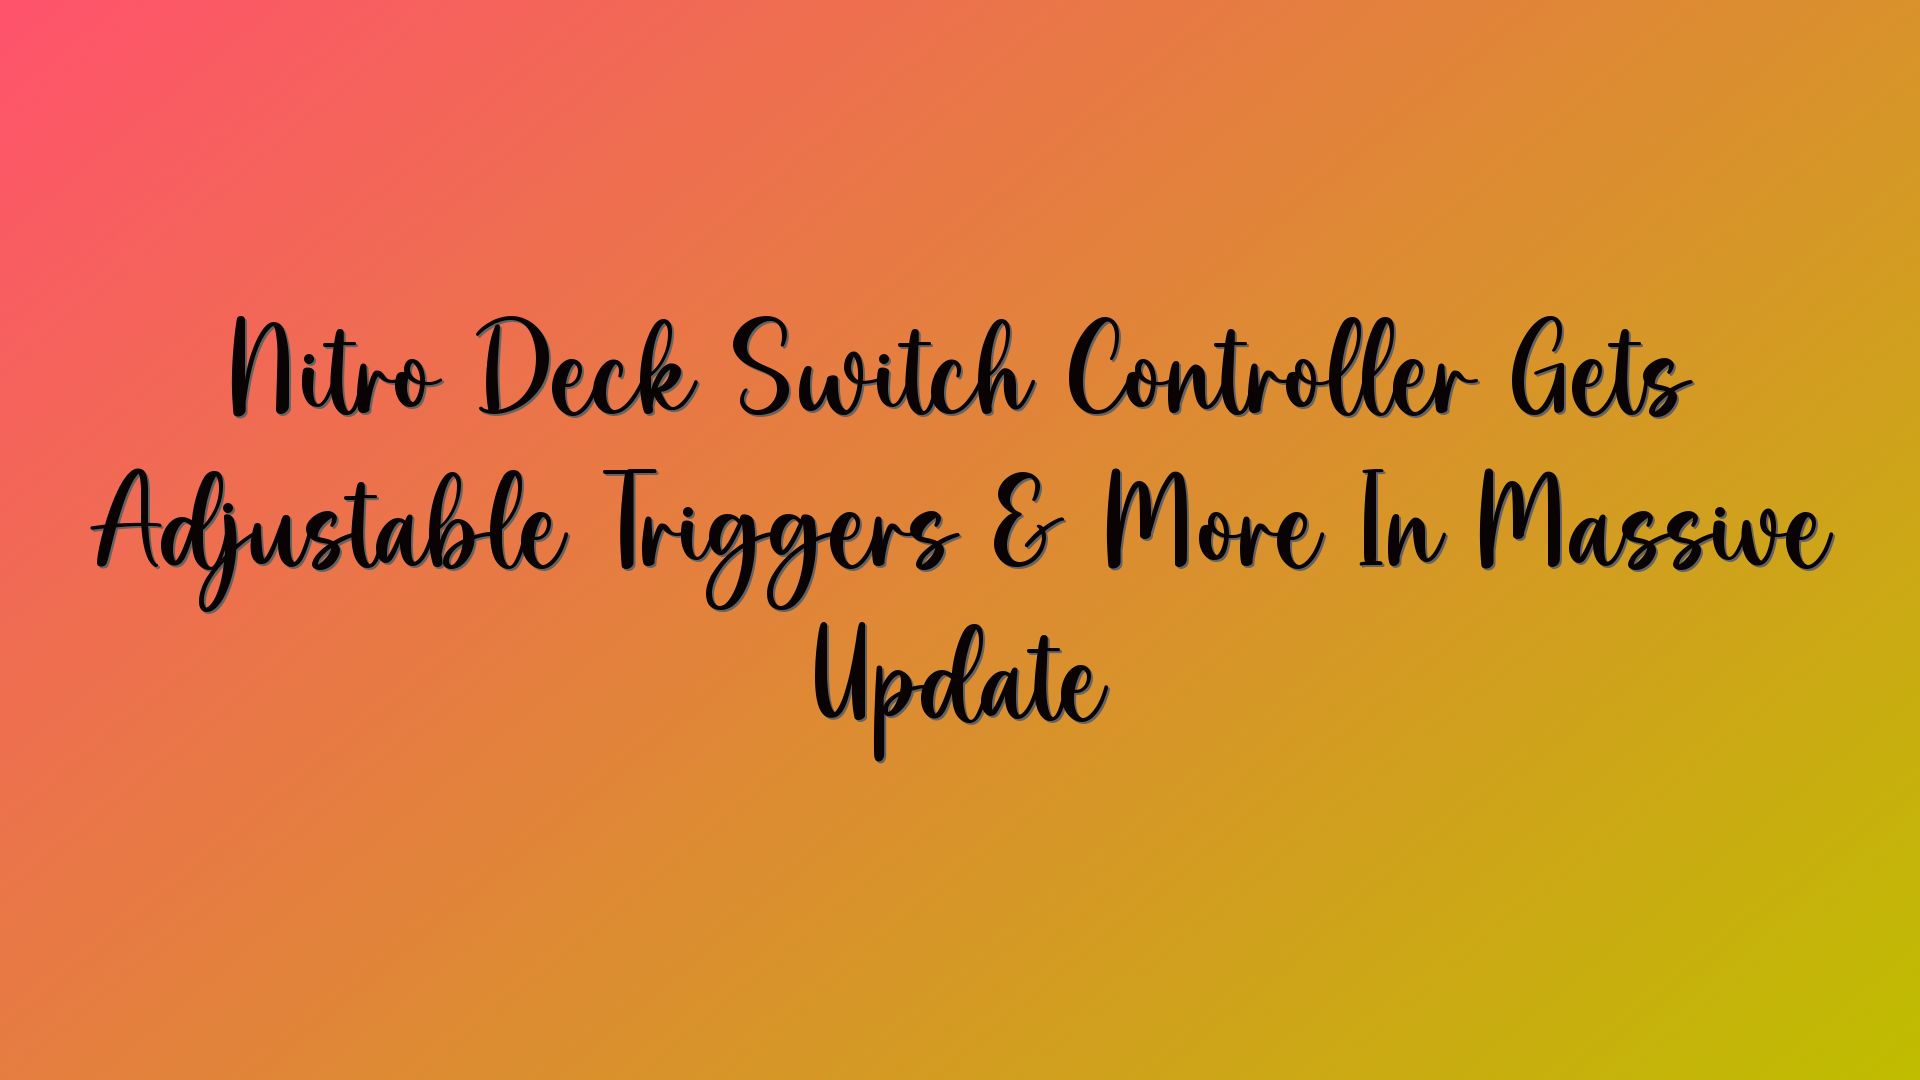 Nitro Deck Switch Controller Gets Adjustable Triggers & More In Massive Update